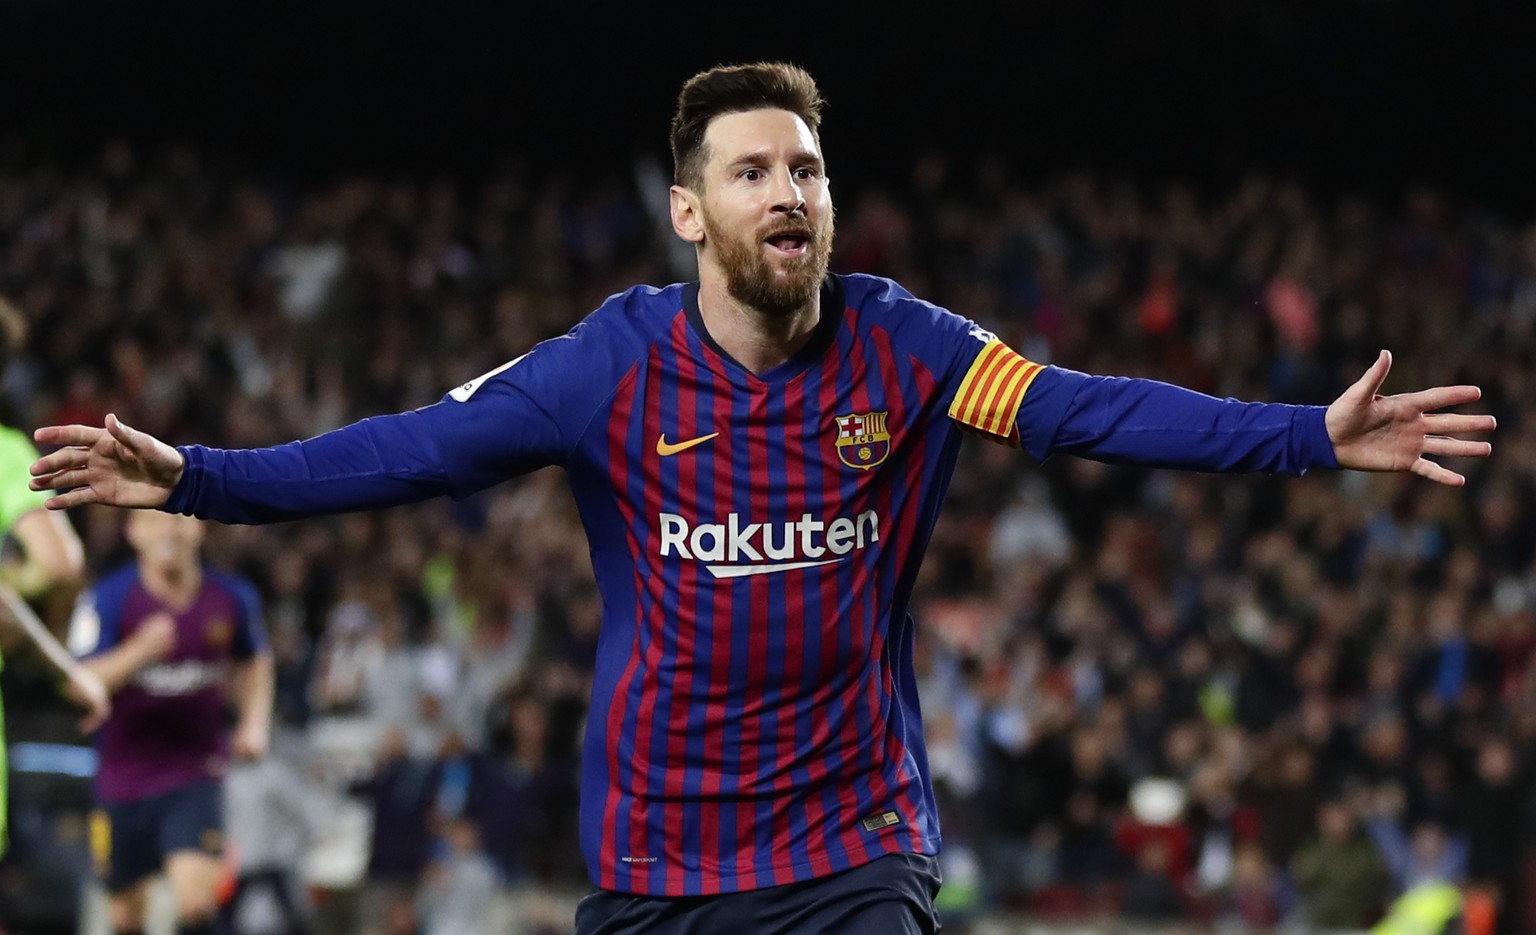 Barcelona forward Lionel Messi celebrates after scoring his side's opening goal during a Spanish La Liga soccer match between FC Barcelona and Levante at the Camp Nou stadium in Barcelona, Spain, Satu ...